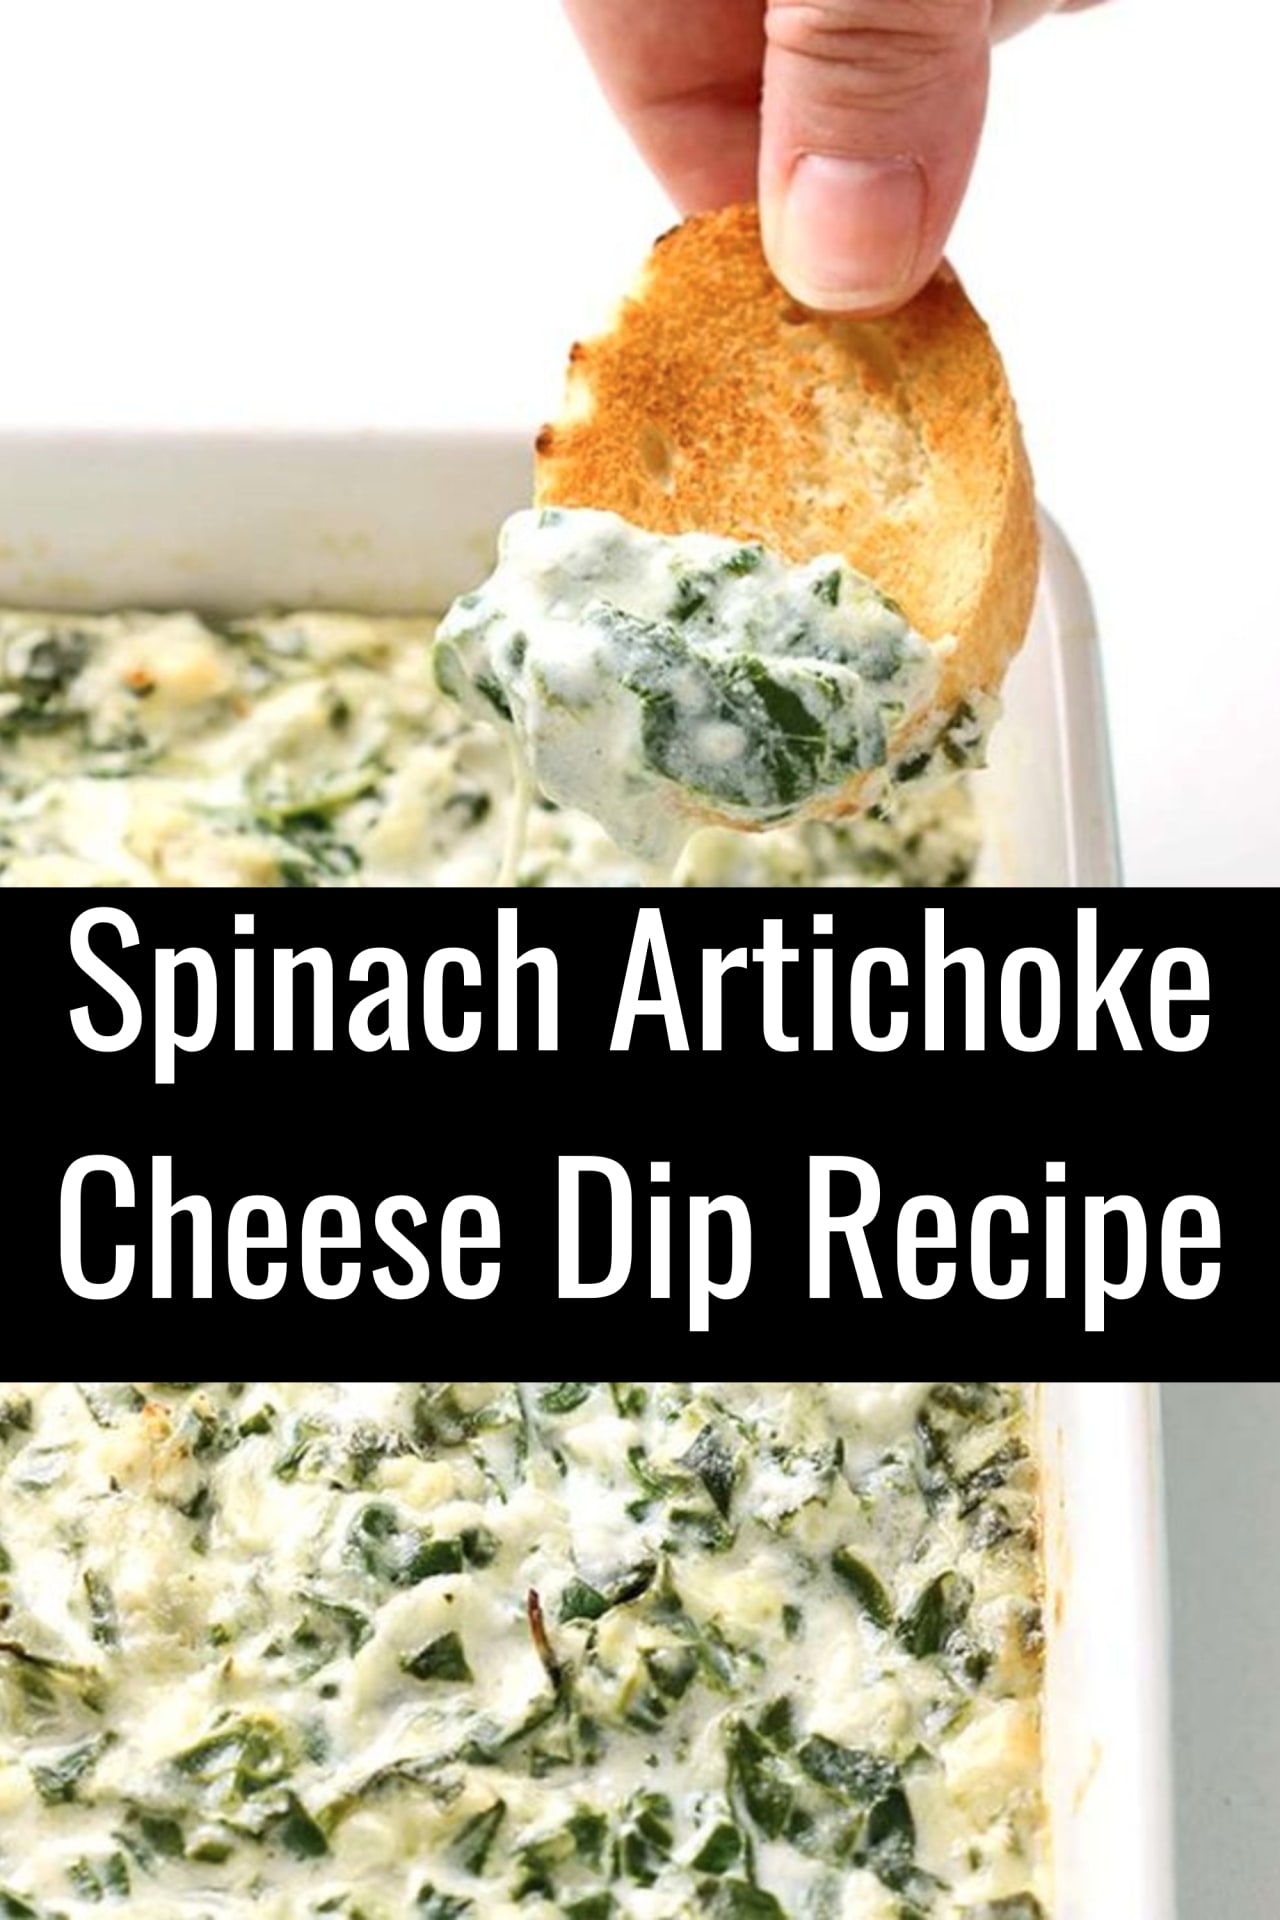 Easy party dip recipes and budget appetizer ideas - Spinach Artichoke Cheese Dip Recipe